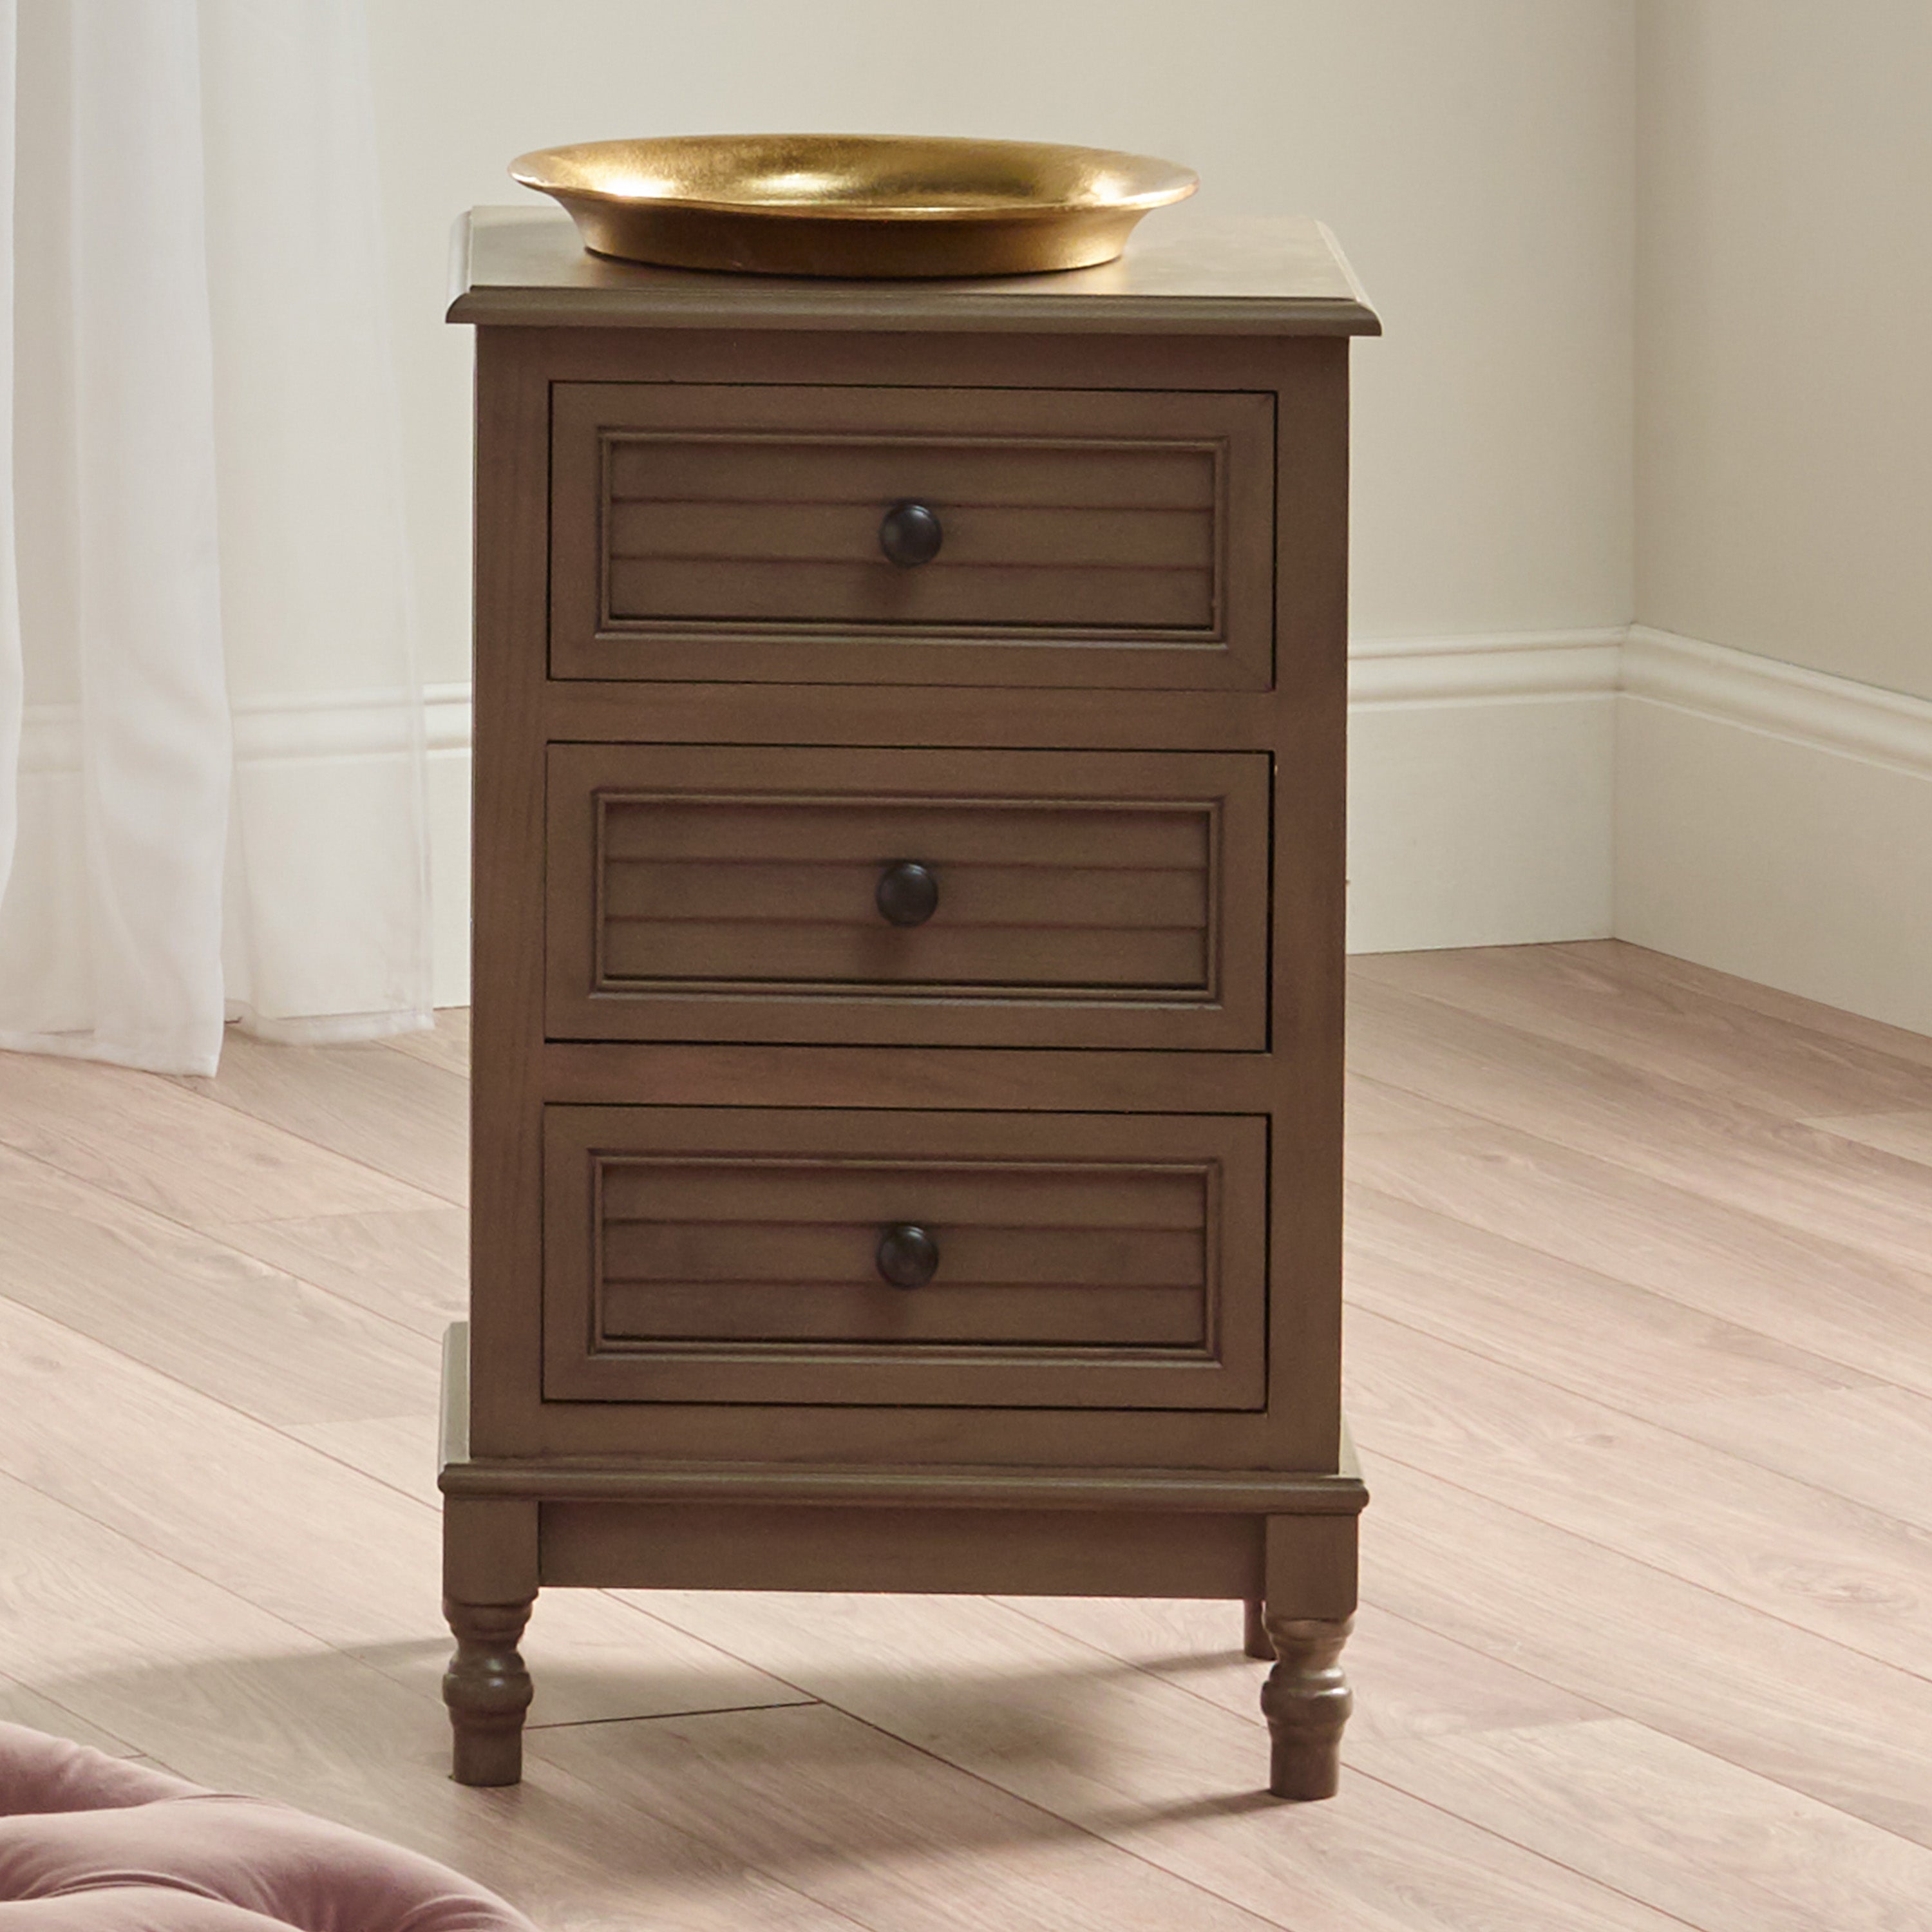 Pacific Ashwell 3 Drawer Bedside Table, Taupe Pine Brown